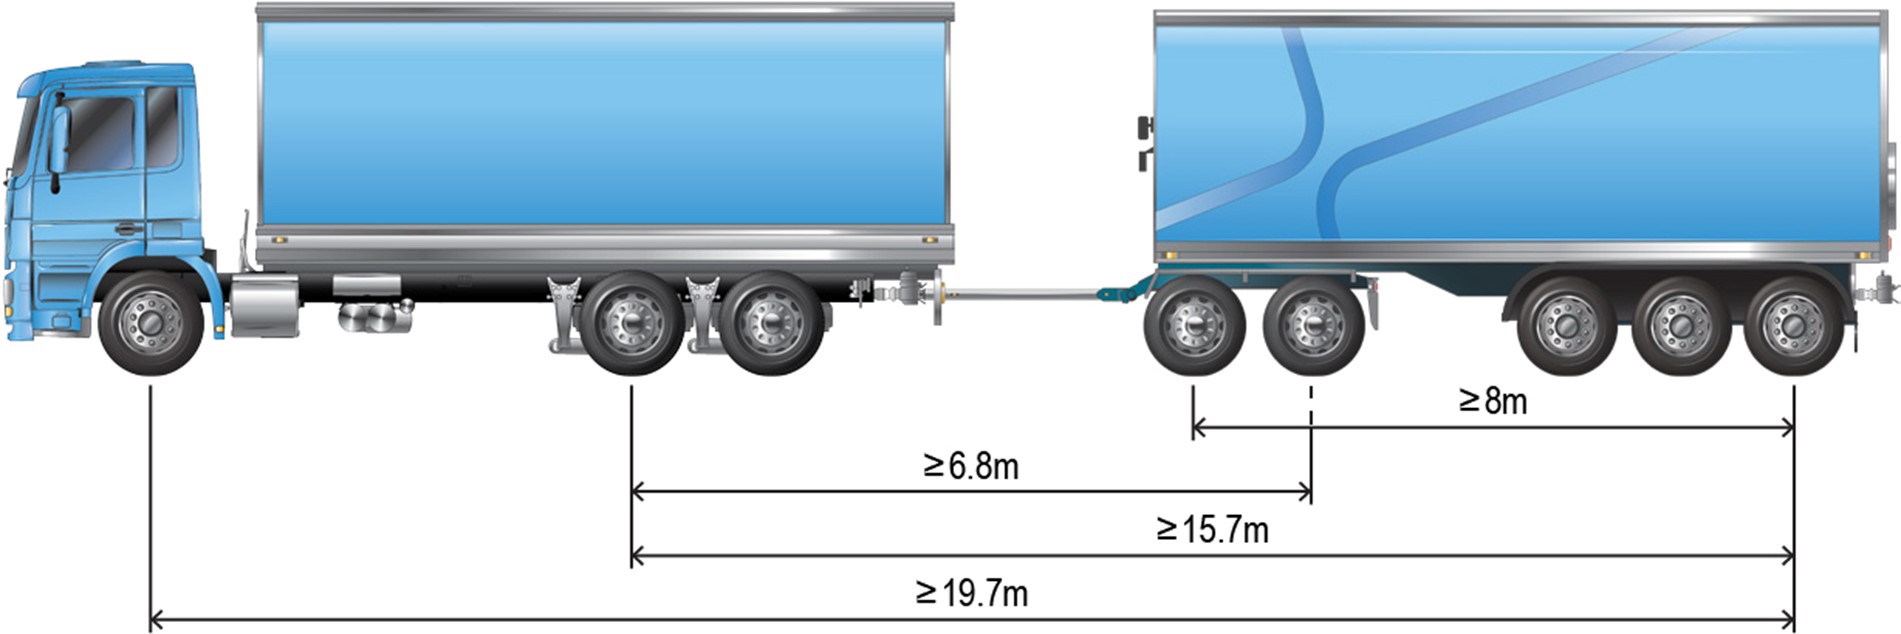 An eligible truck and 5-axle dog trailer